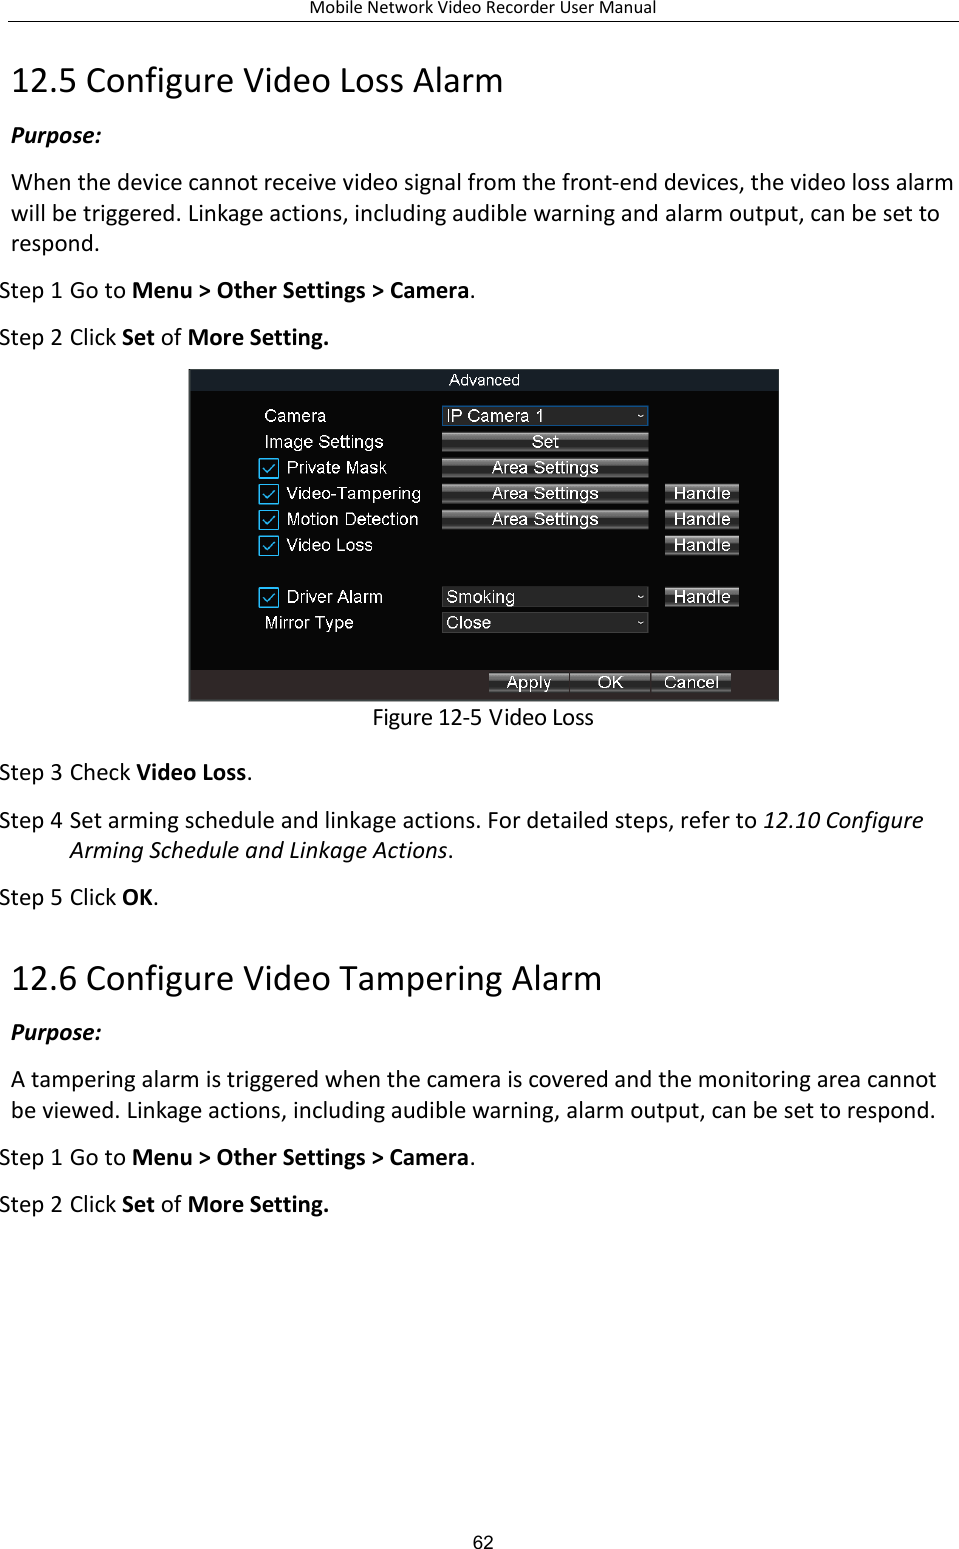 Mobile Network Video Recorder User Manual 62 12.5 Configure Video Loss Alarm Purpose:   When the device cannot receive video signal from the front-end devices, the video loss alarm will be triggered. Linkage actions, including audible warning and alarm output, can be set to respond. Step 1 Go to Menu &gt; Other Settings &gt; Camera. Step 2 Click Set of More Setting.  Figure 12-5 Video Loss Step 3 Check Video Loss. Step 4 Set arming schedule and linkage actions. For detailed steps, refer to 12.10 Configure Arming Schedule and Linkage Actions. Step 5 Click OK. 12.6 Configure Video Tampering Alarm Purpose:   A tampering alarm is triggered when the camera is covered and the monitoring area cannot be viewed. Linkage actions, including audible warning, alarm output, can be set to respond. Step 1 Go to Menu &gt; Other Settings &gt; Camera. Step 2 Click Set of More Setting. 